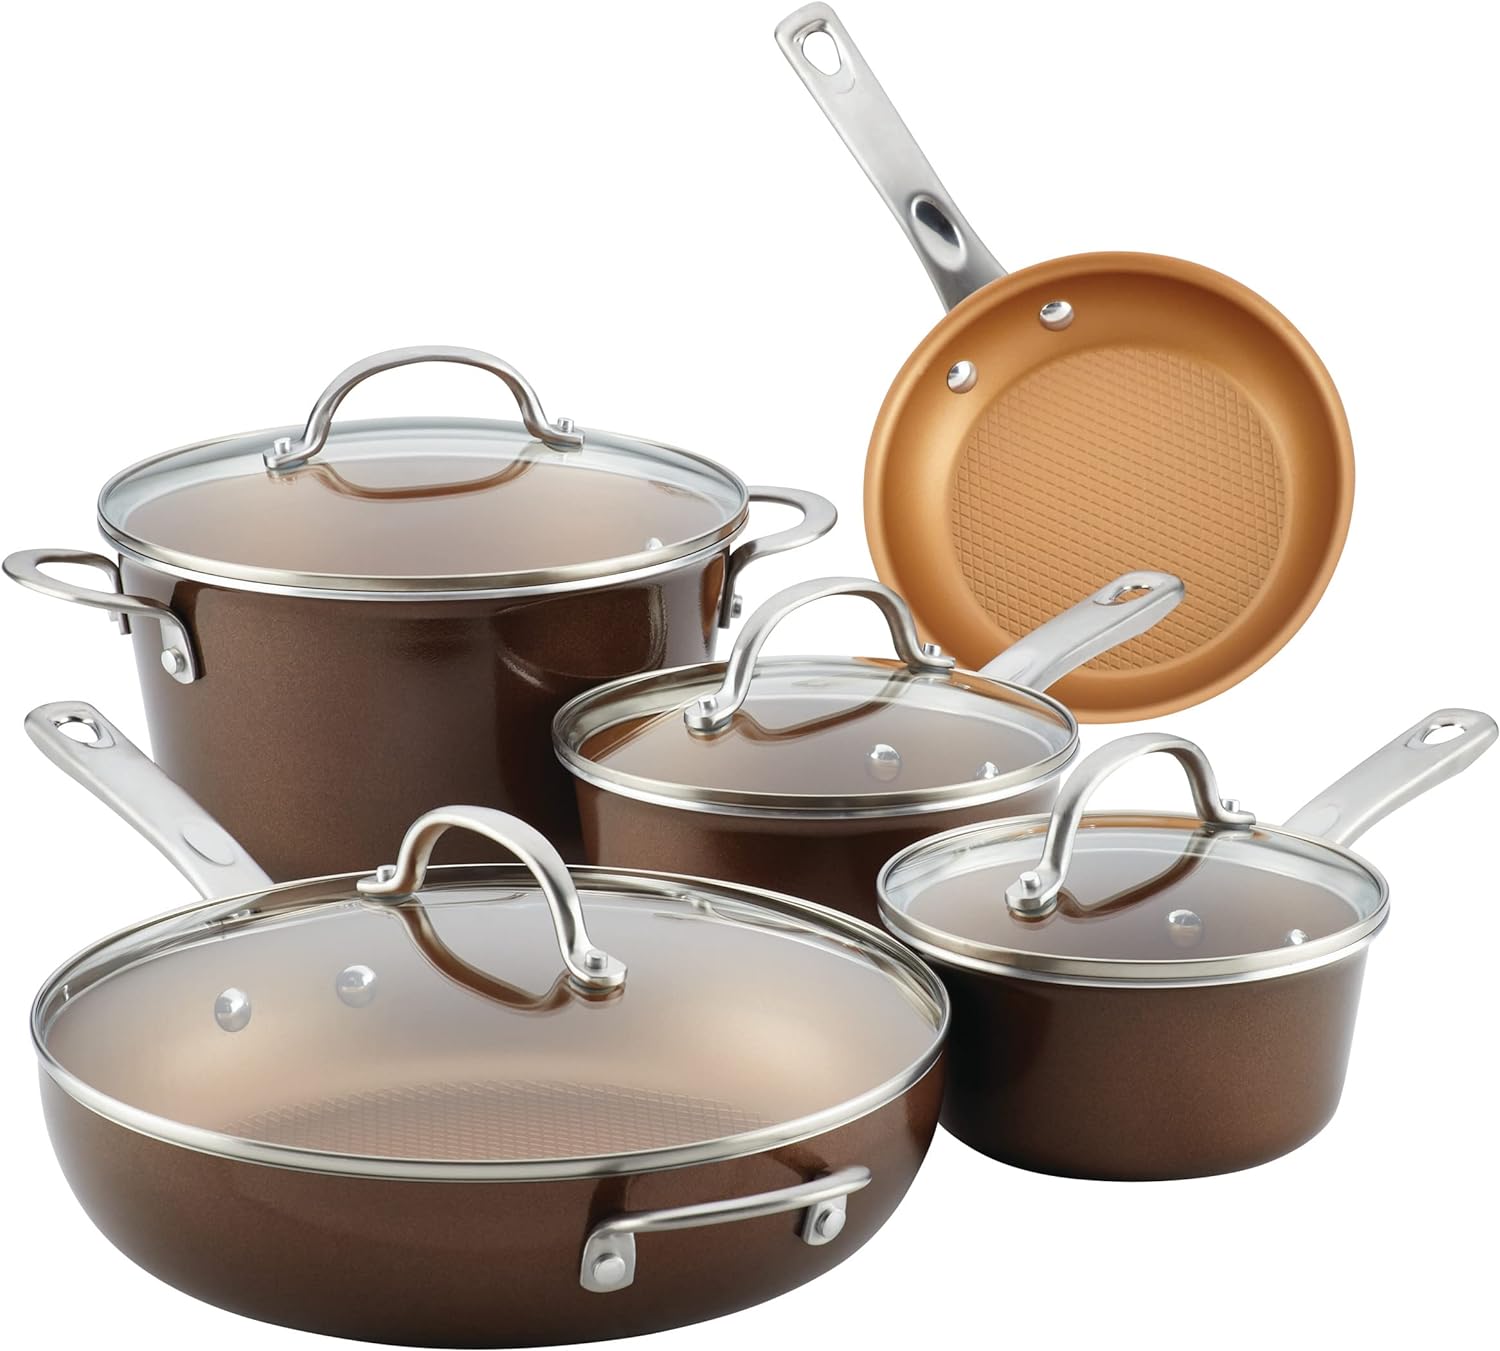  Ayesha Curry Home Collection Nonstick Cookware Pots and Pans Set, 9 Piece